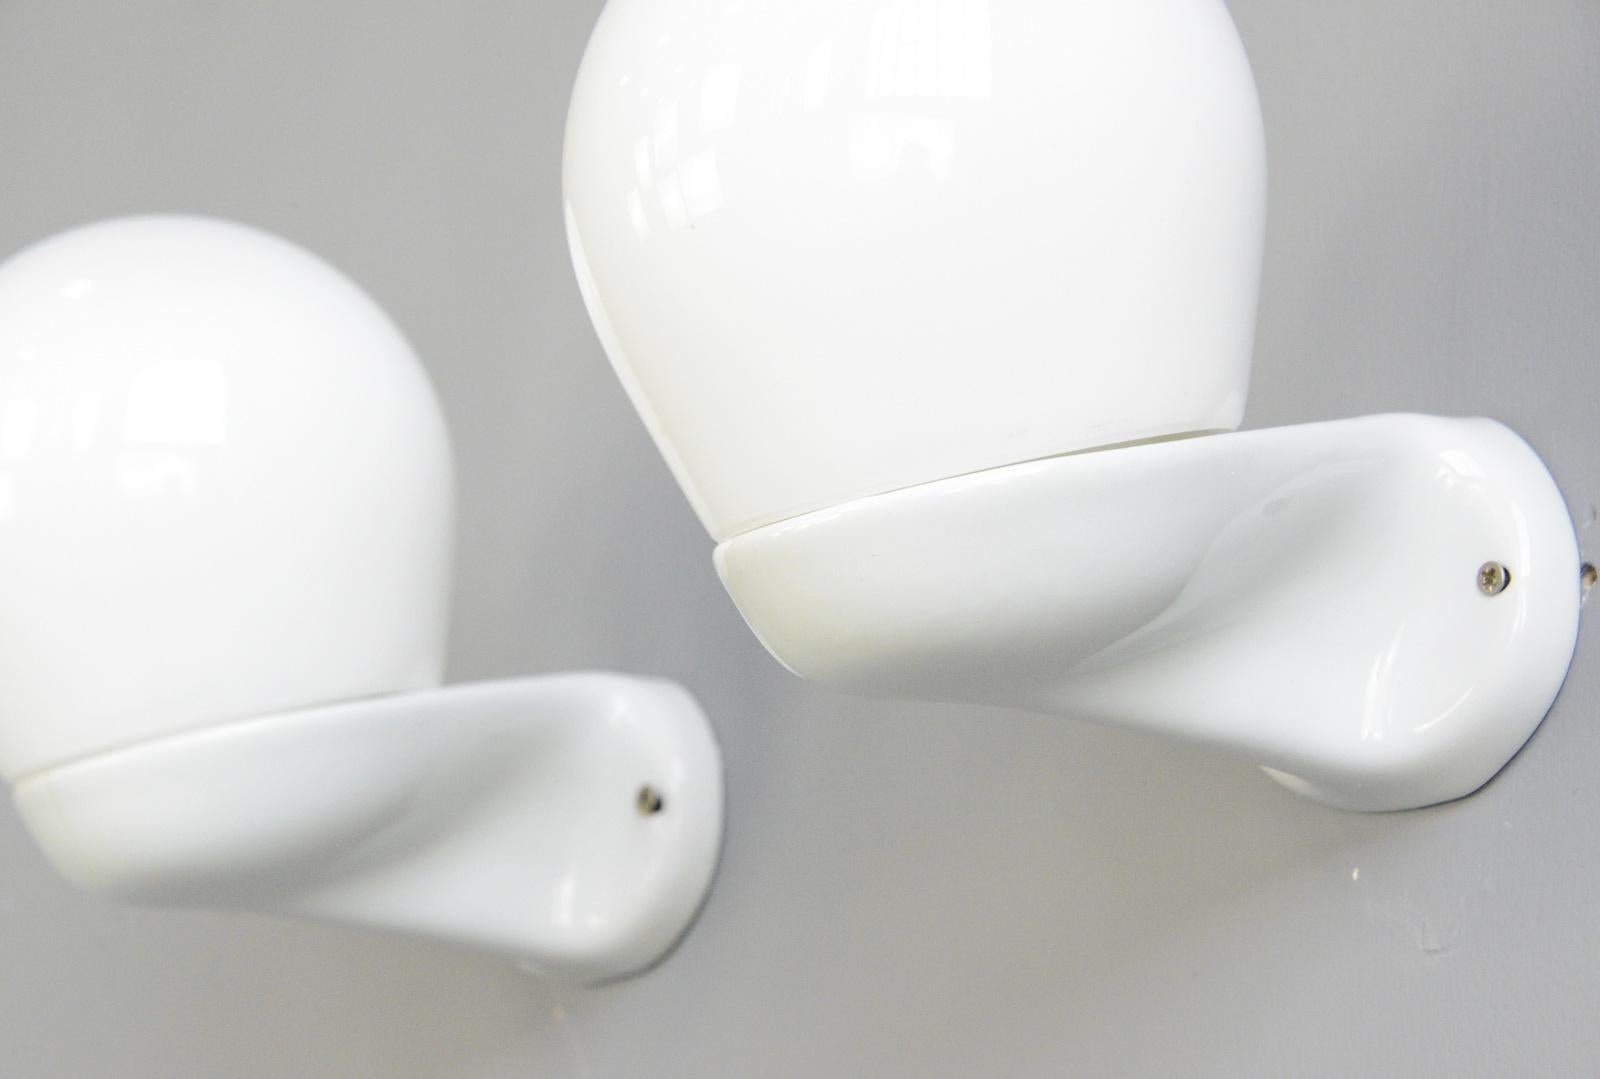 Porcelain bathroom lights by Wagenfeld for Lindner, circa 1950s

- Price is per light (9 available)
- Porcelain wall bracket with opaline glass shade
- Takes E27 fitting bulbs
- Wires directly into the wall
- Model 6040
- Produced by